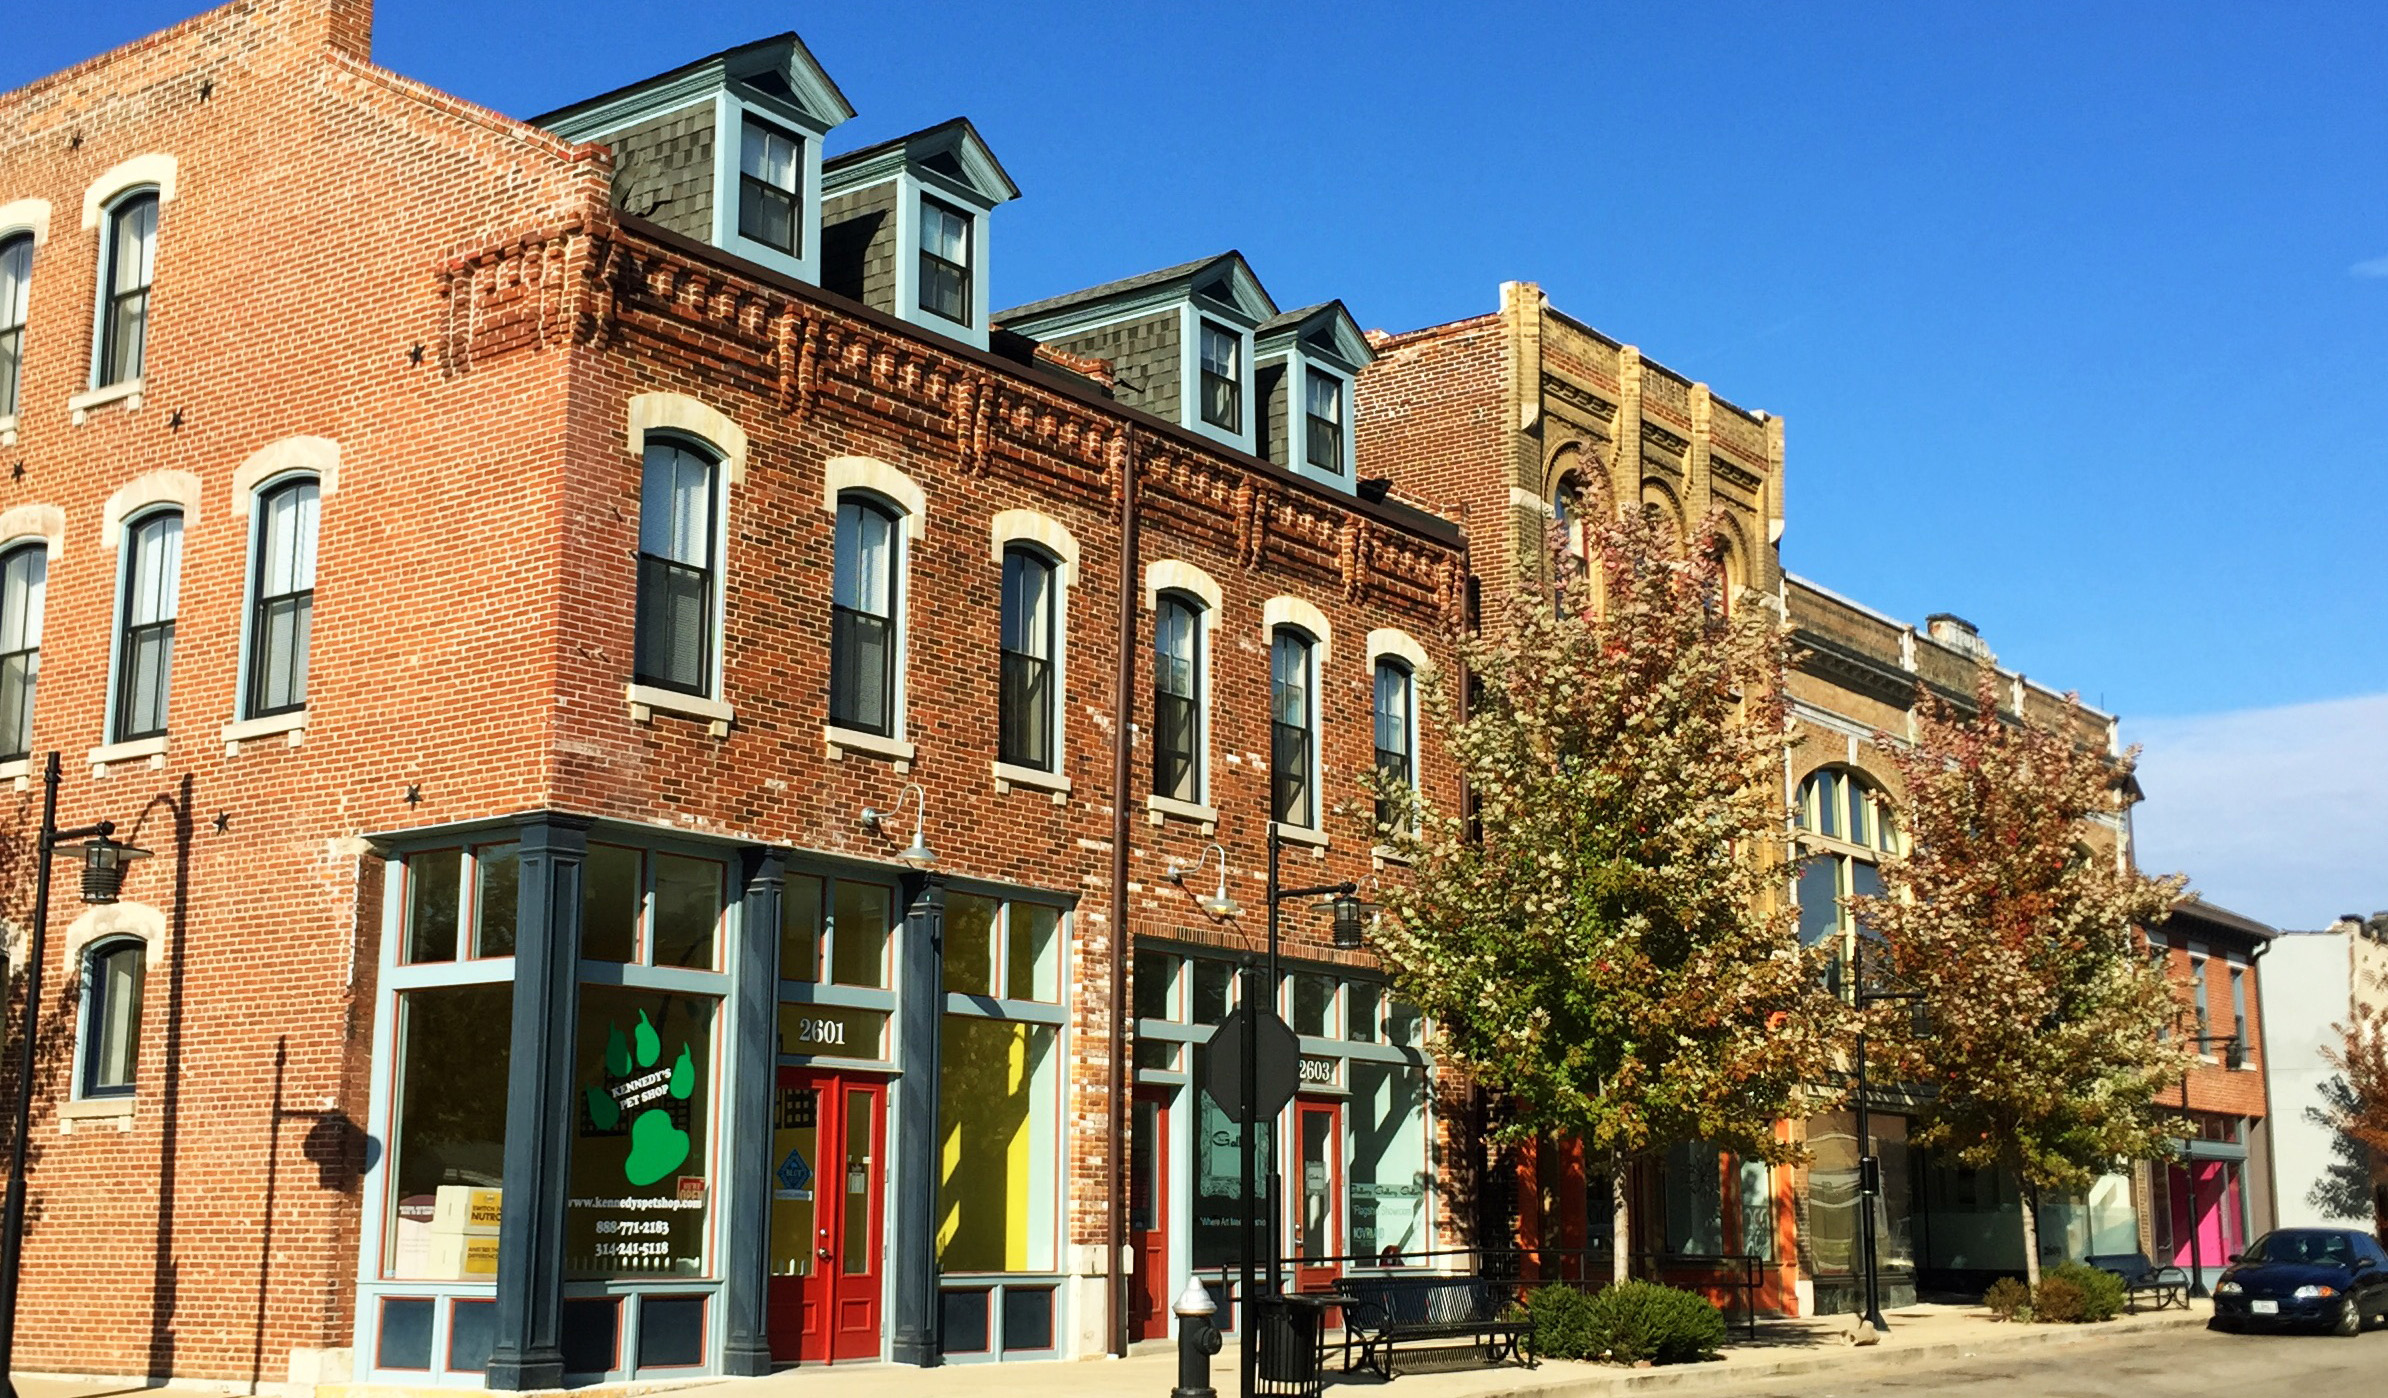 Brick building with colorful storefronts